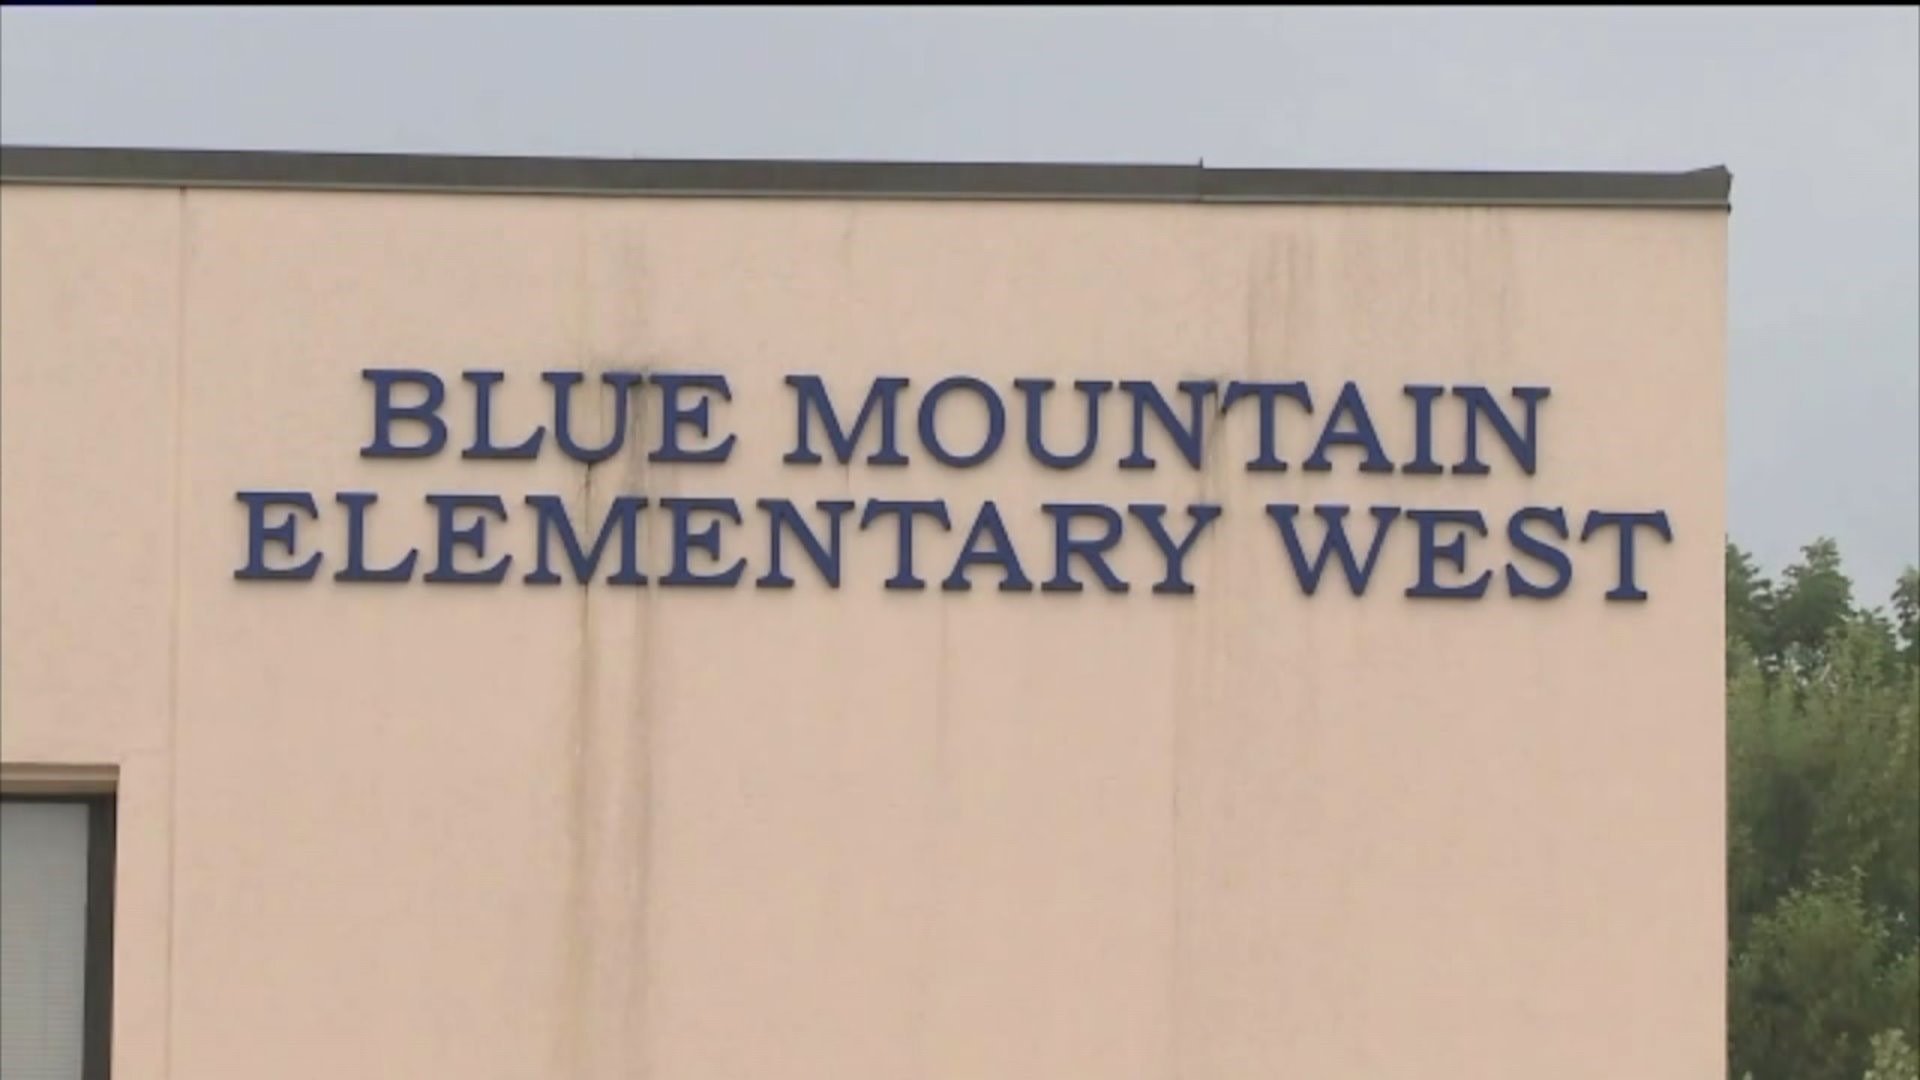 Blue Mountain Elementary West has been closed since last year due to mold problems.